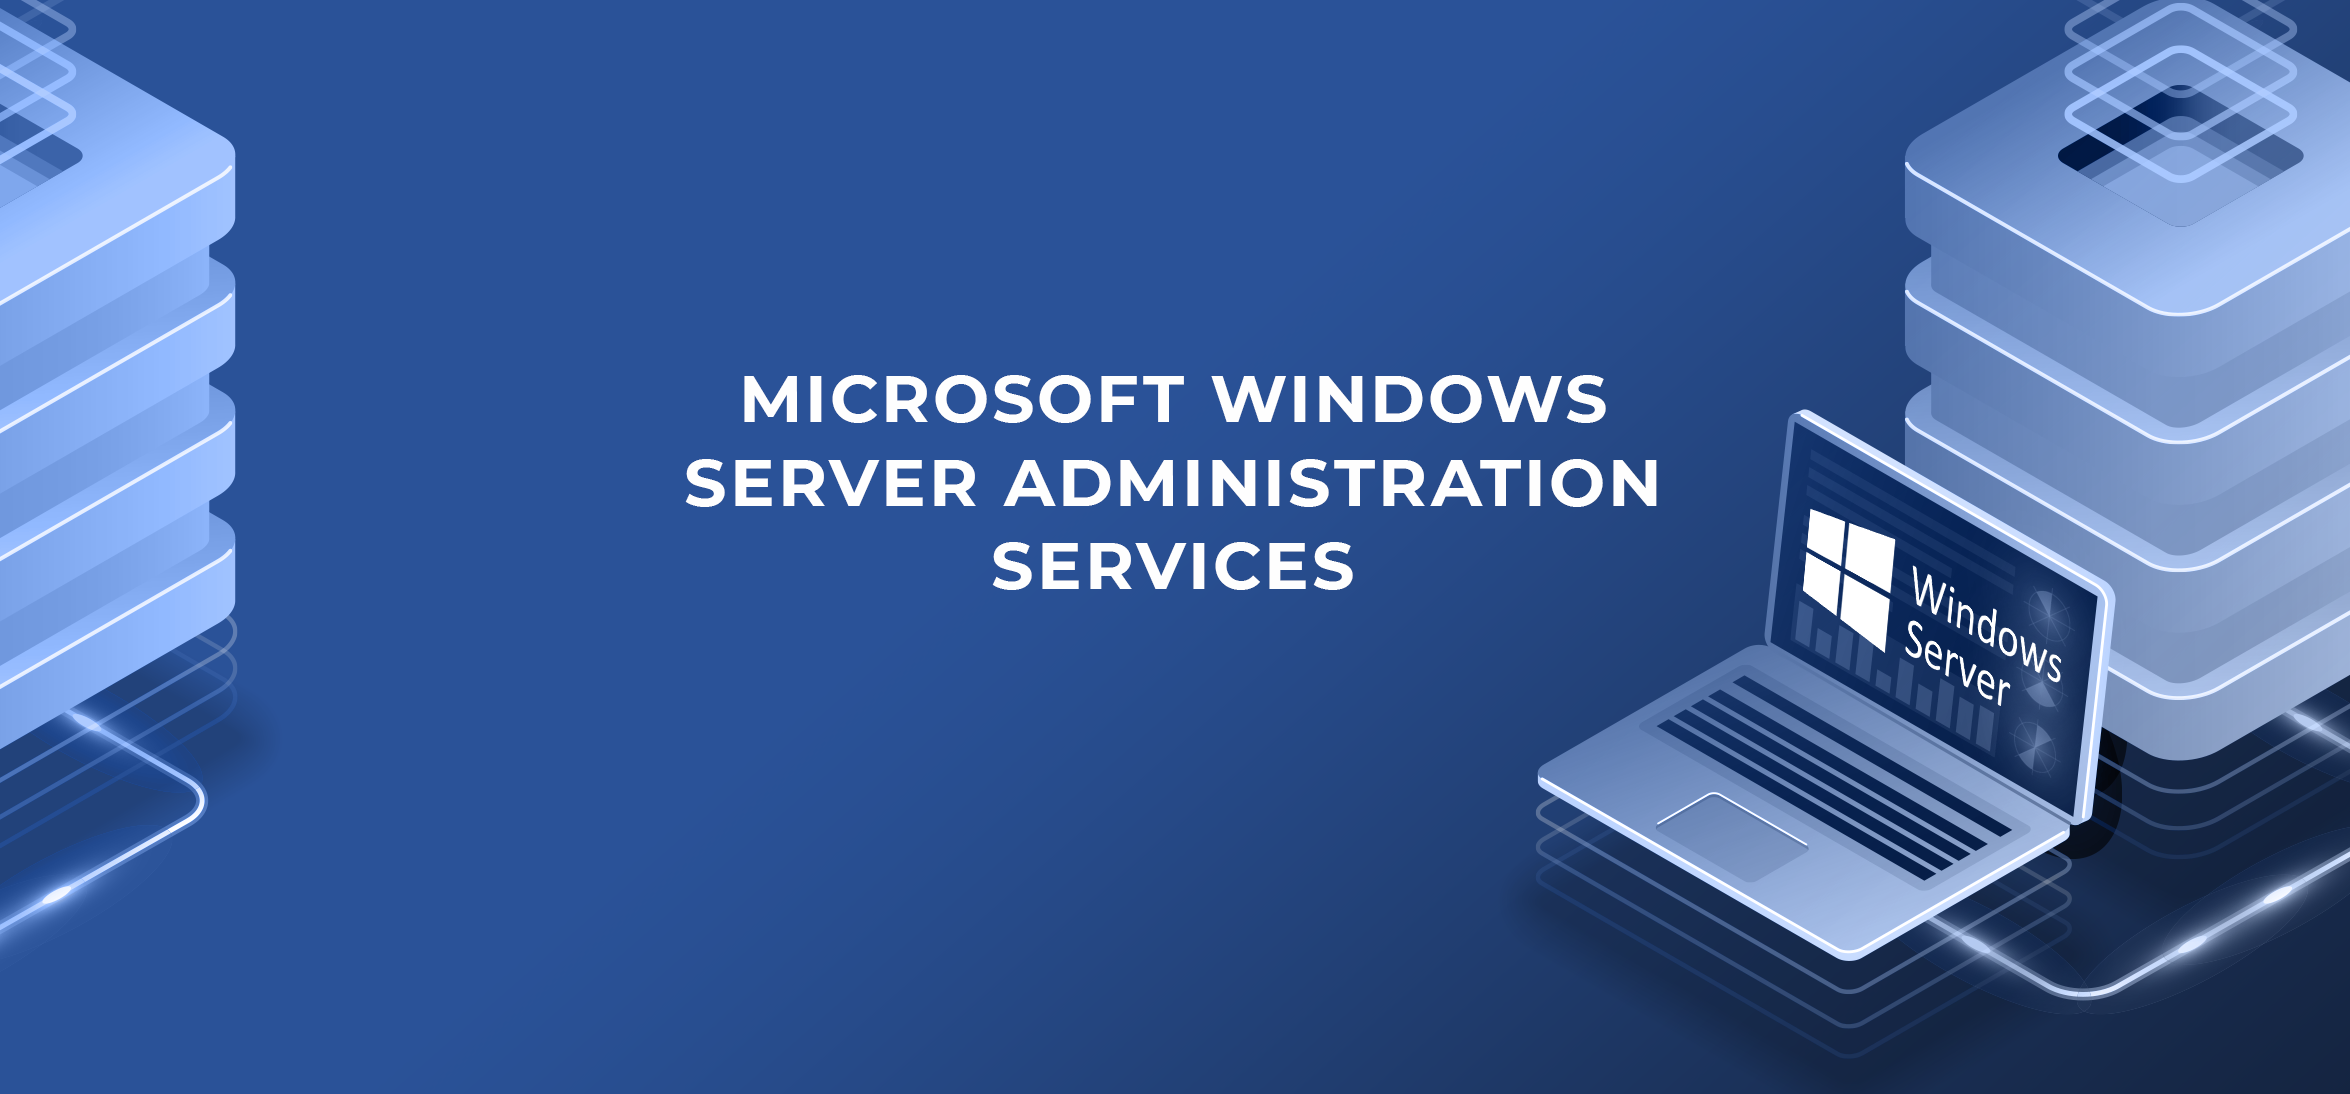 Effective Windows Server Administration and Support Solution Provider in Lakeside CA, 92040